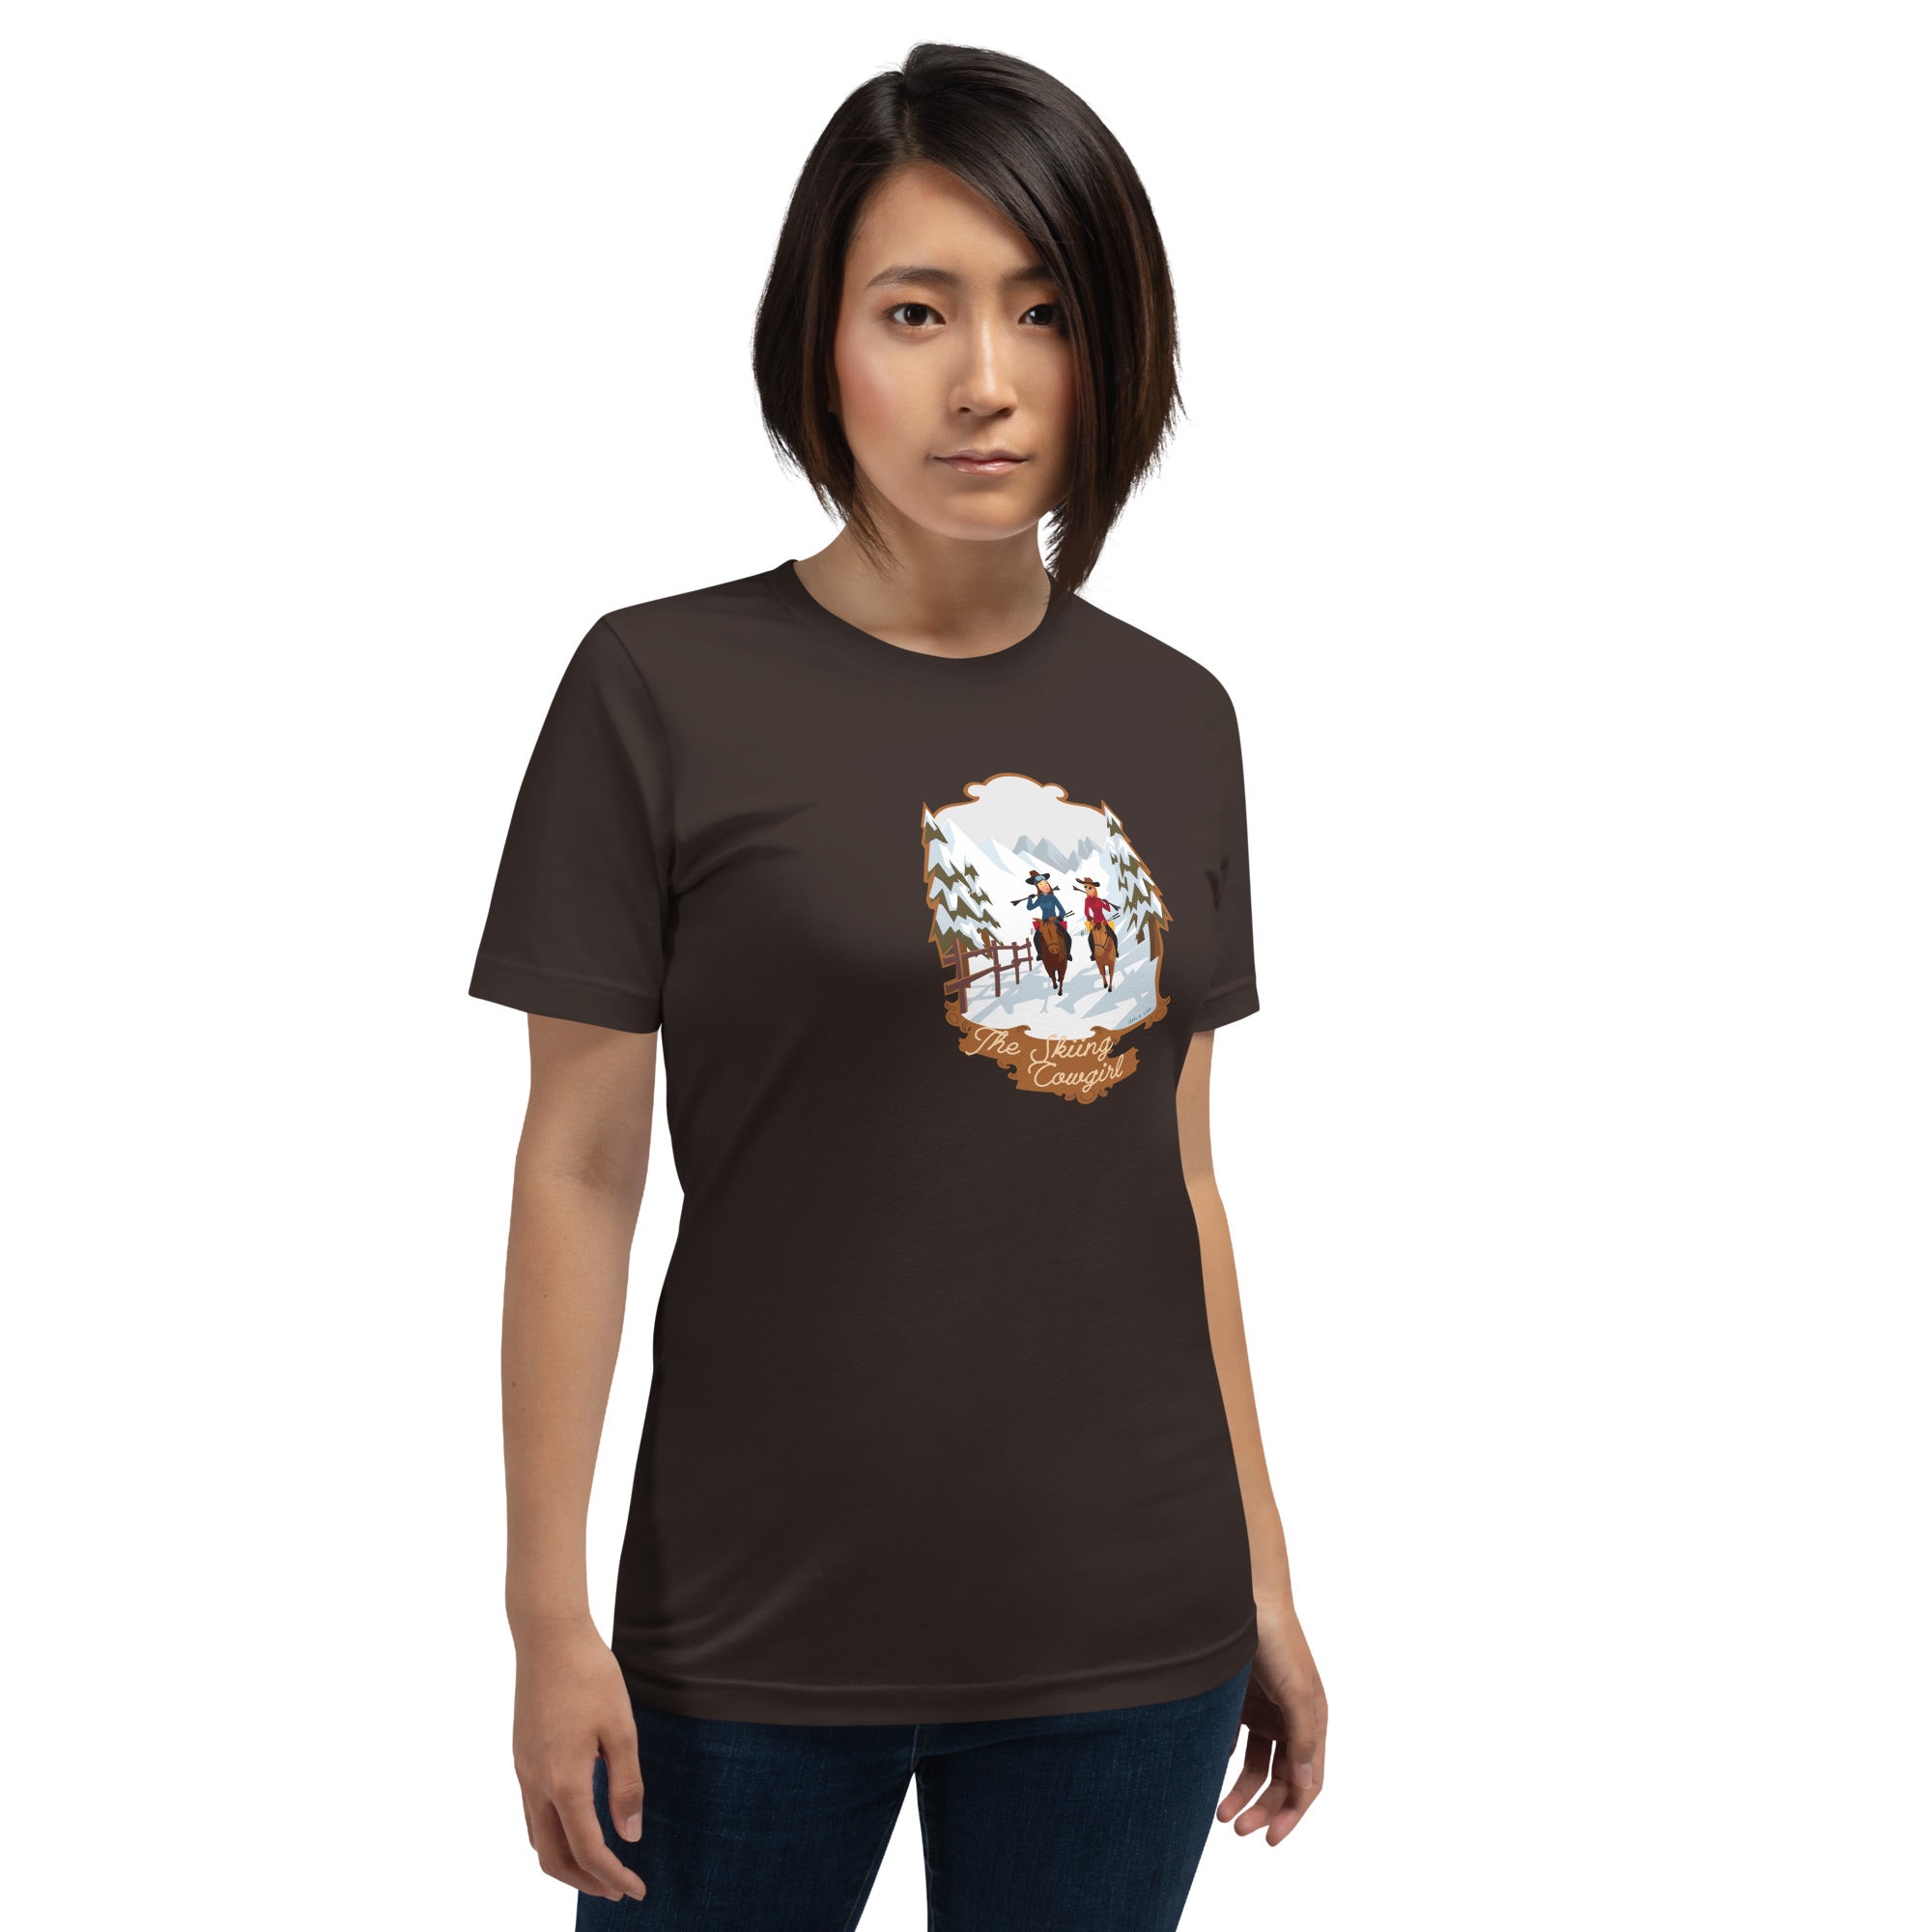 Unisex cotton t-shirt The Skiing Cowgirl on dark colors